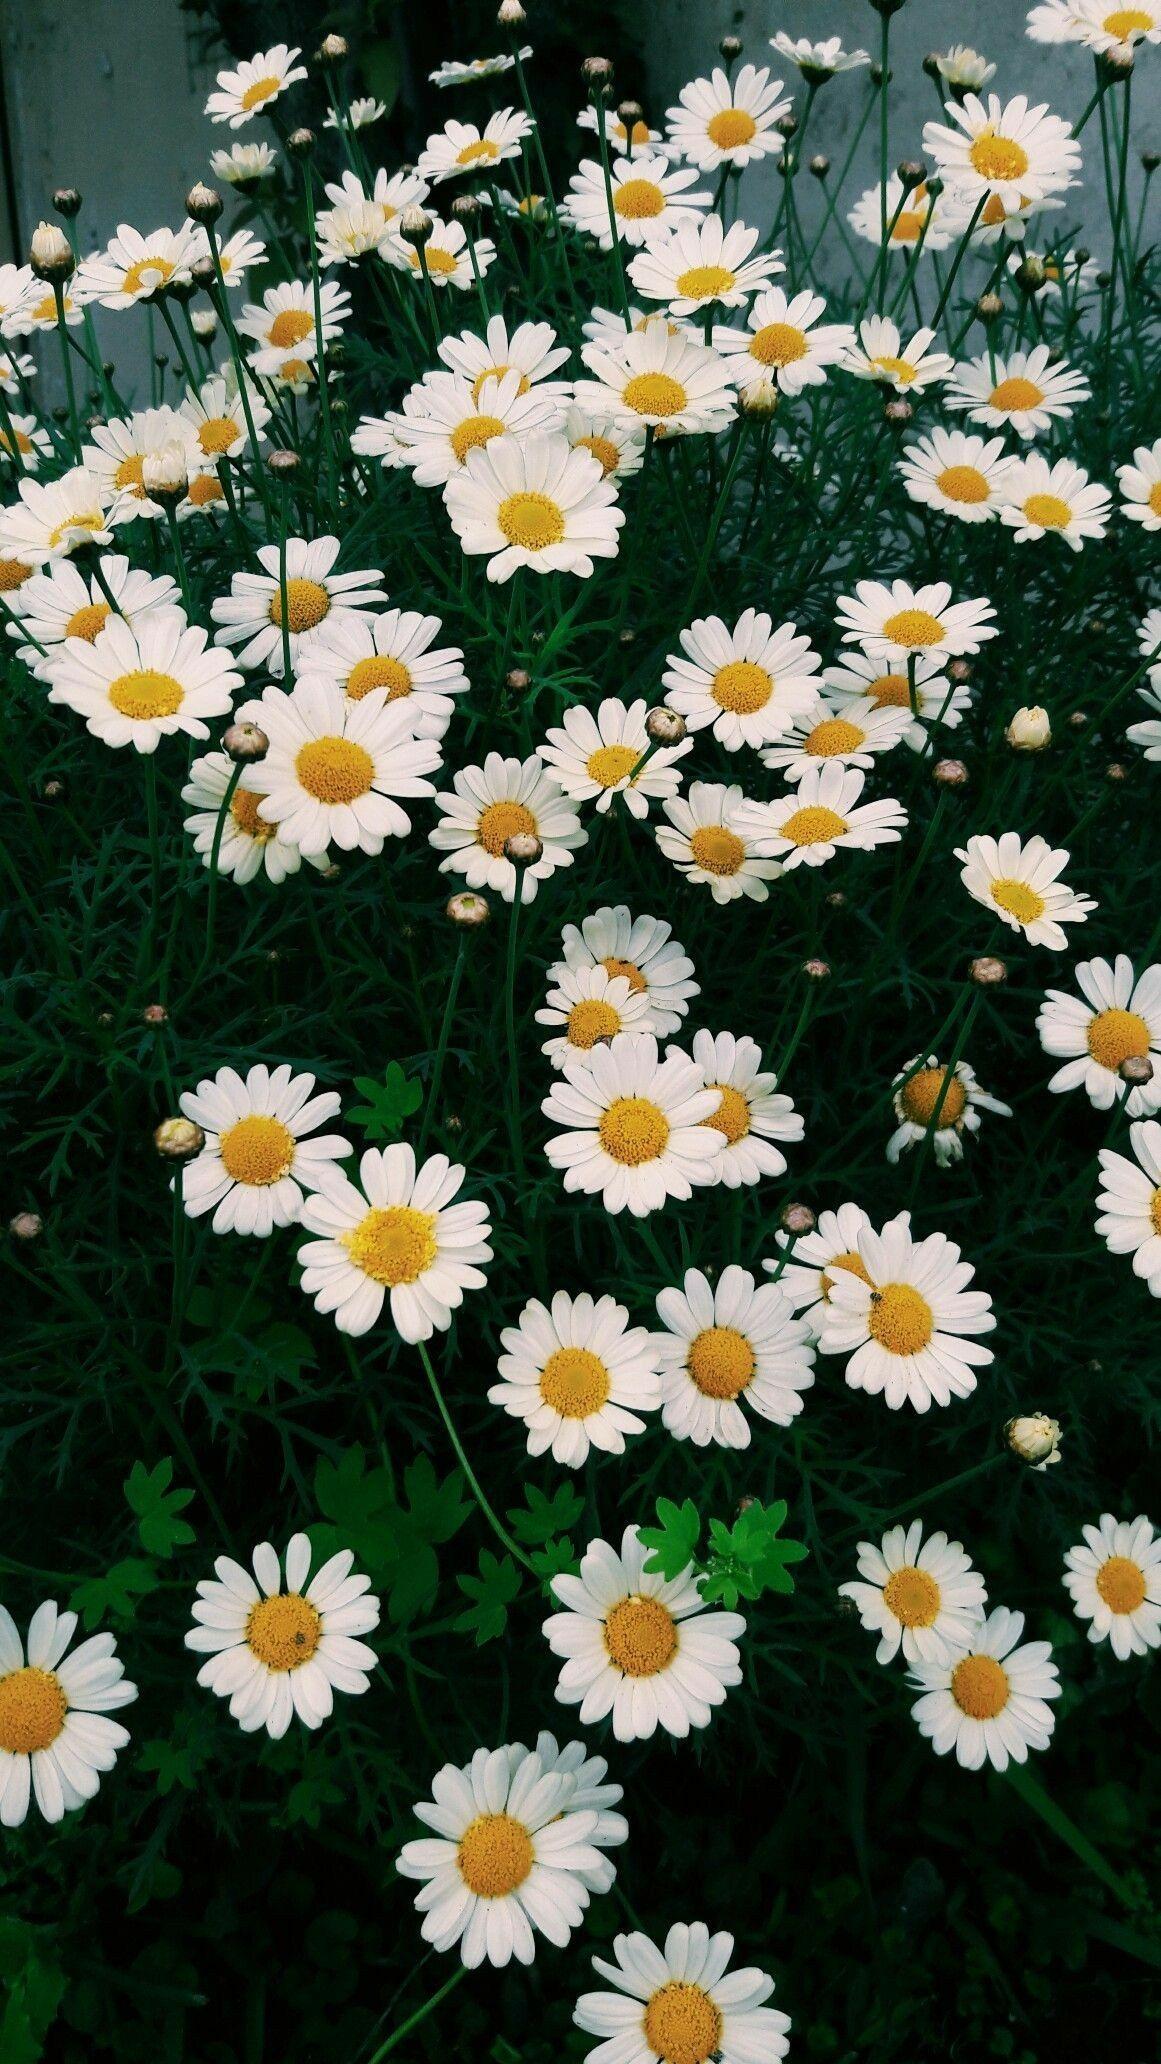 Aesthetic Daisy Wallpapers - Top Free Aesthetic Daisy Backgrounds